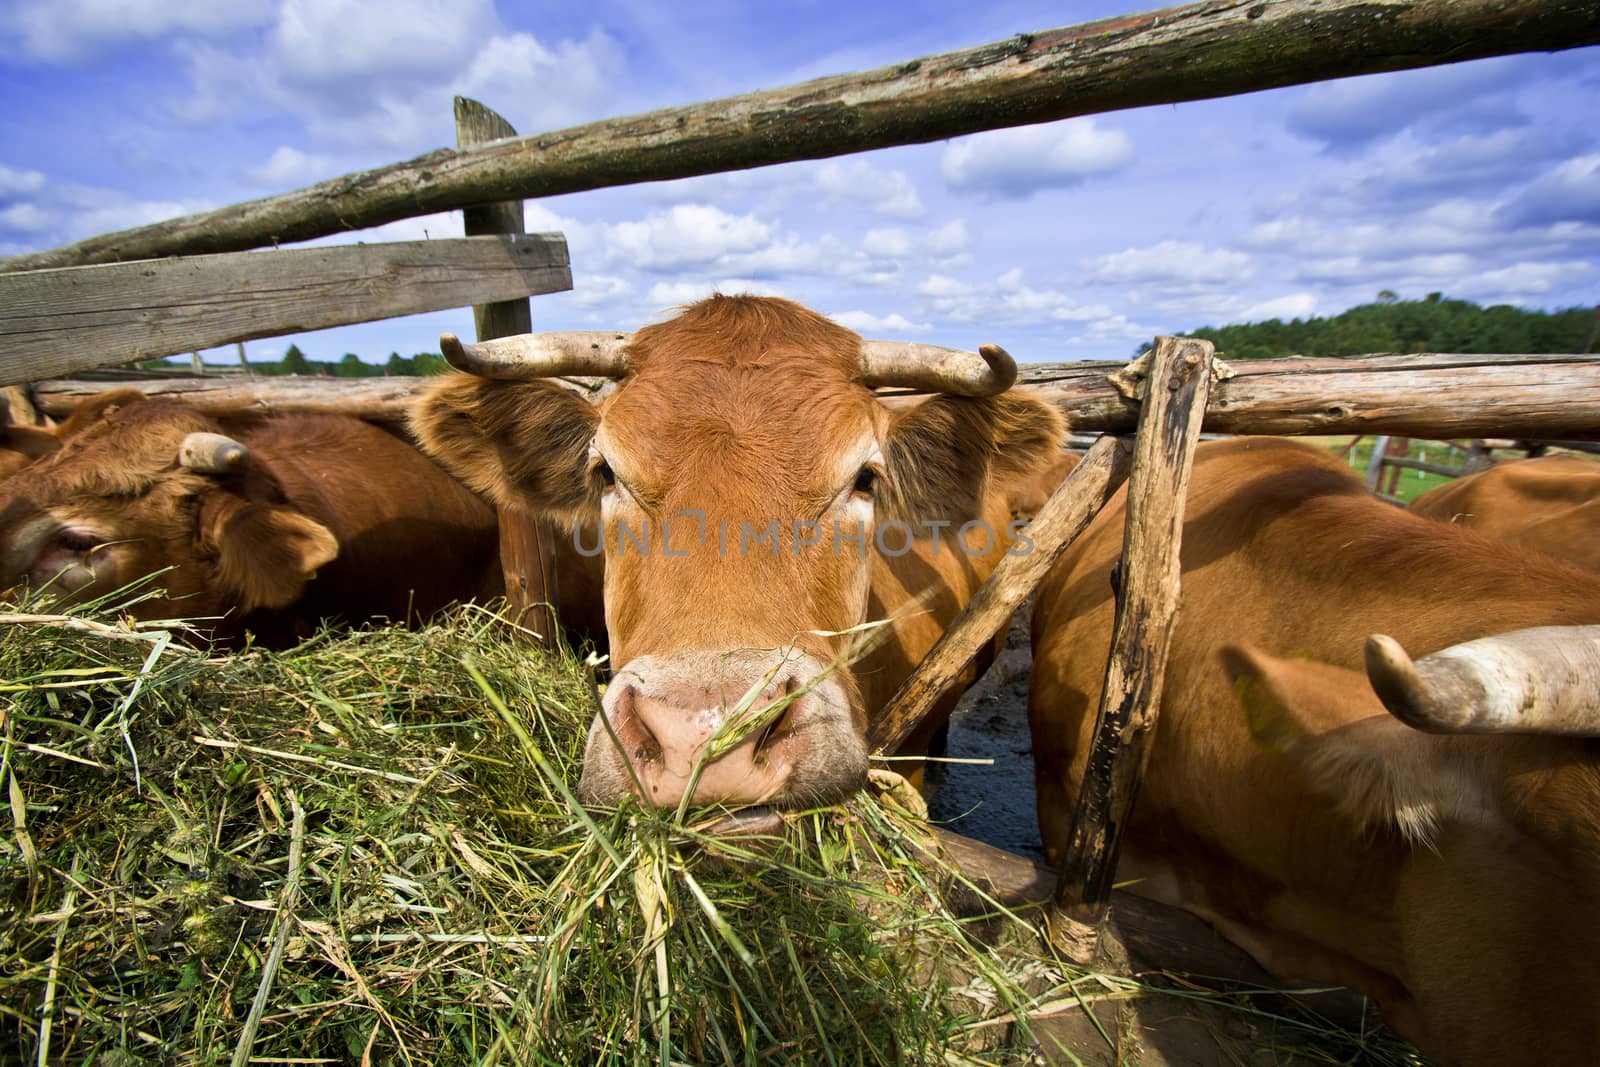 Cows eating straw. by satariel